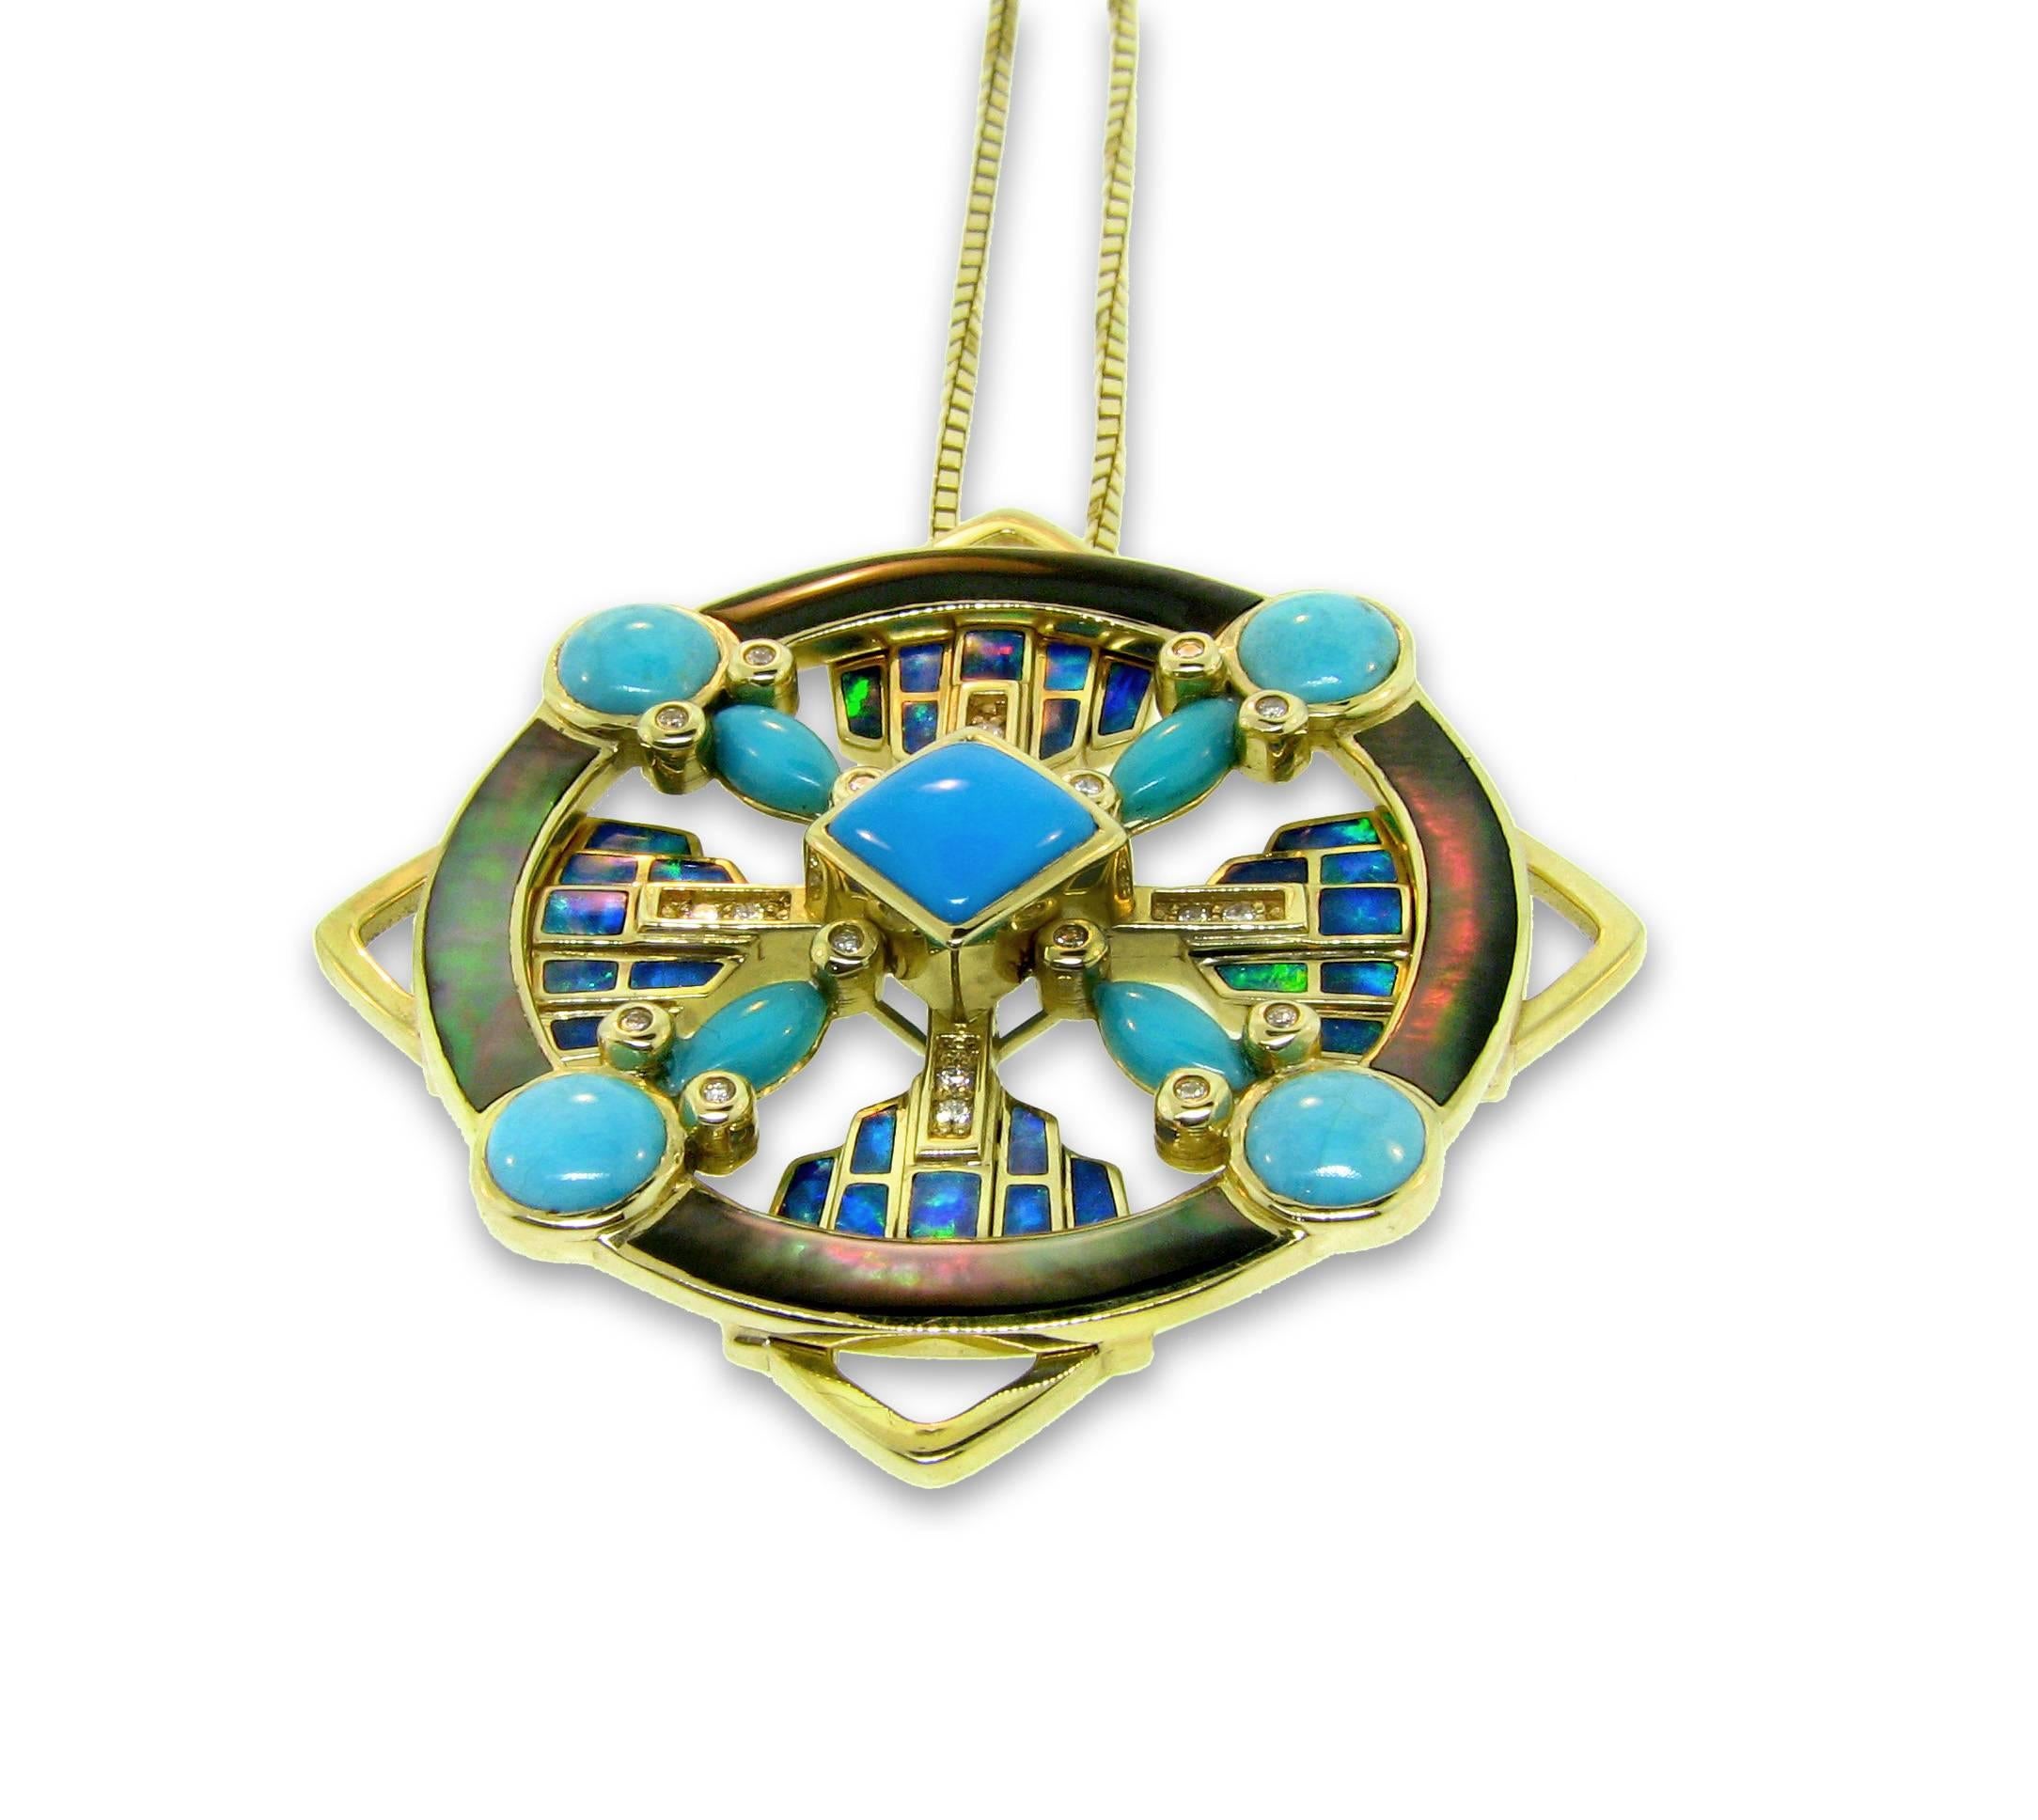 This 14kt gold Elemental mandala pendant designed by Santa Fe based artist, and international jewelry design award winner Jonathan Duran. 

The modern geometric design of this pendant creates a very unique look while the mandala-style shape inspires